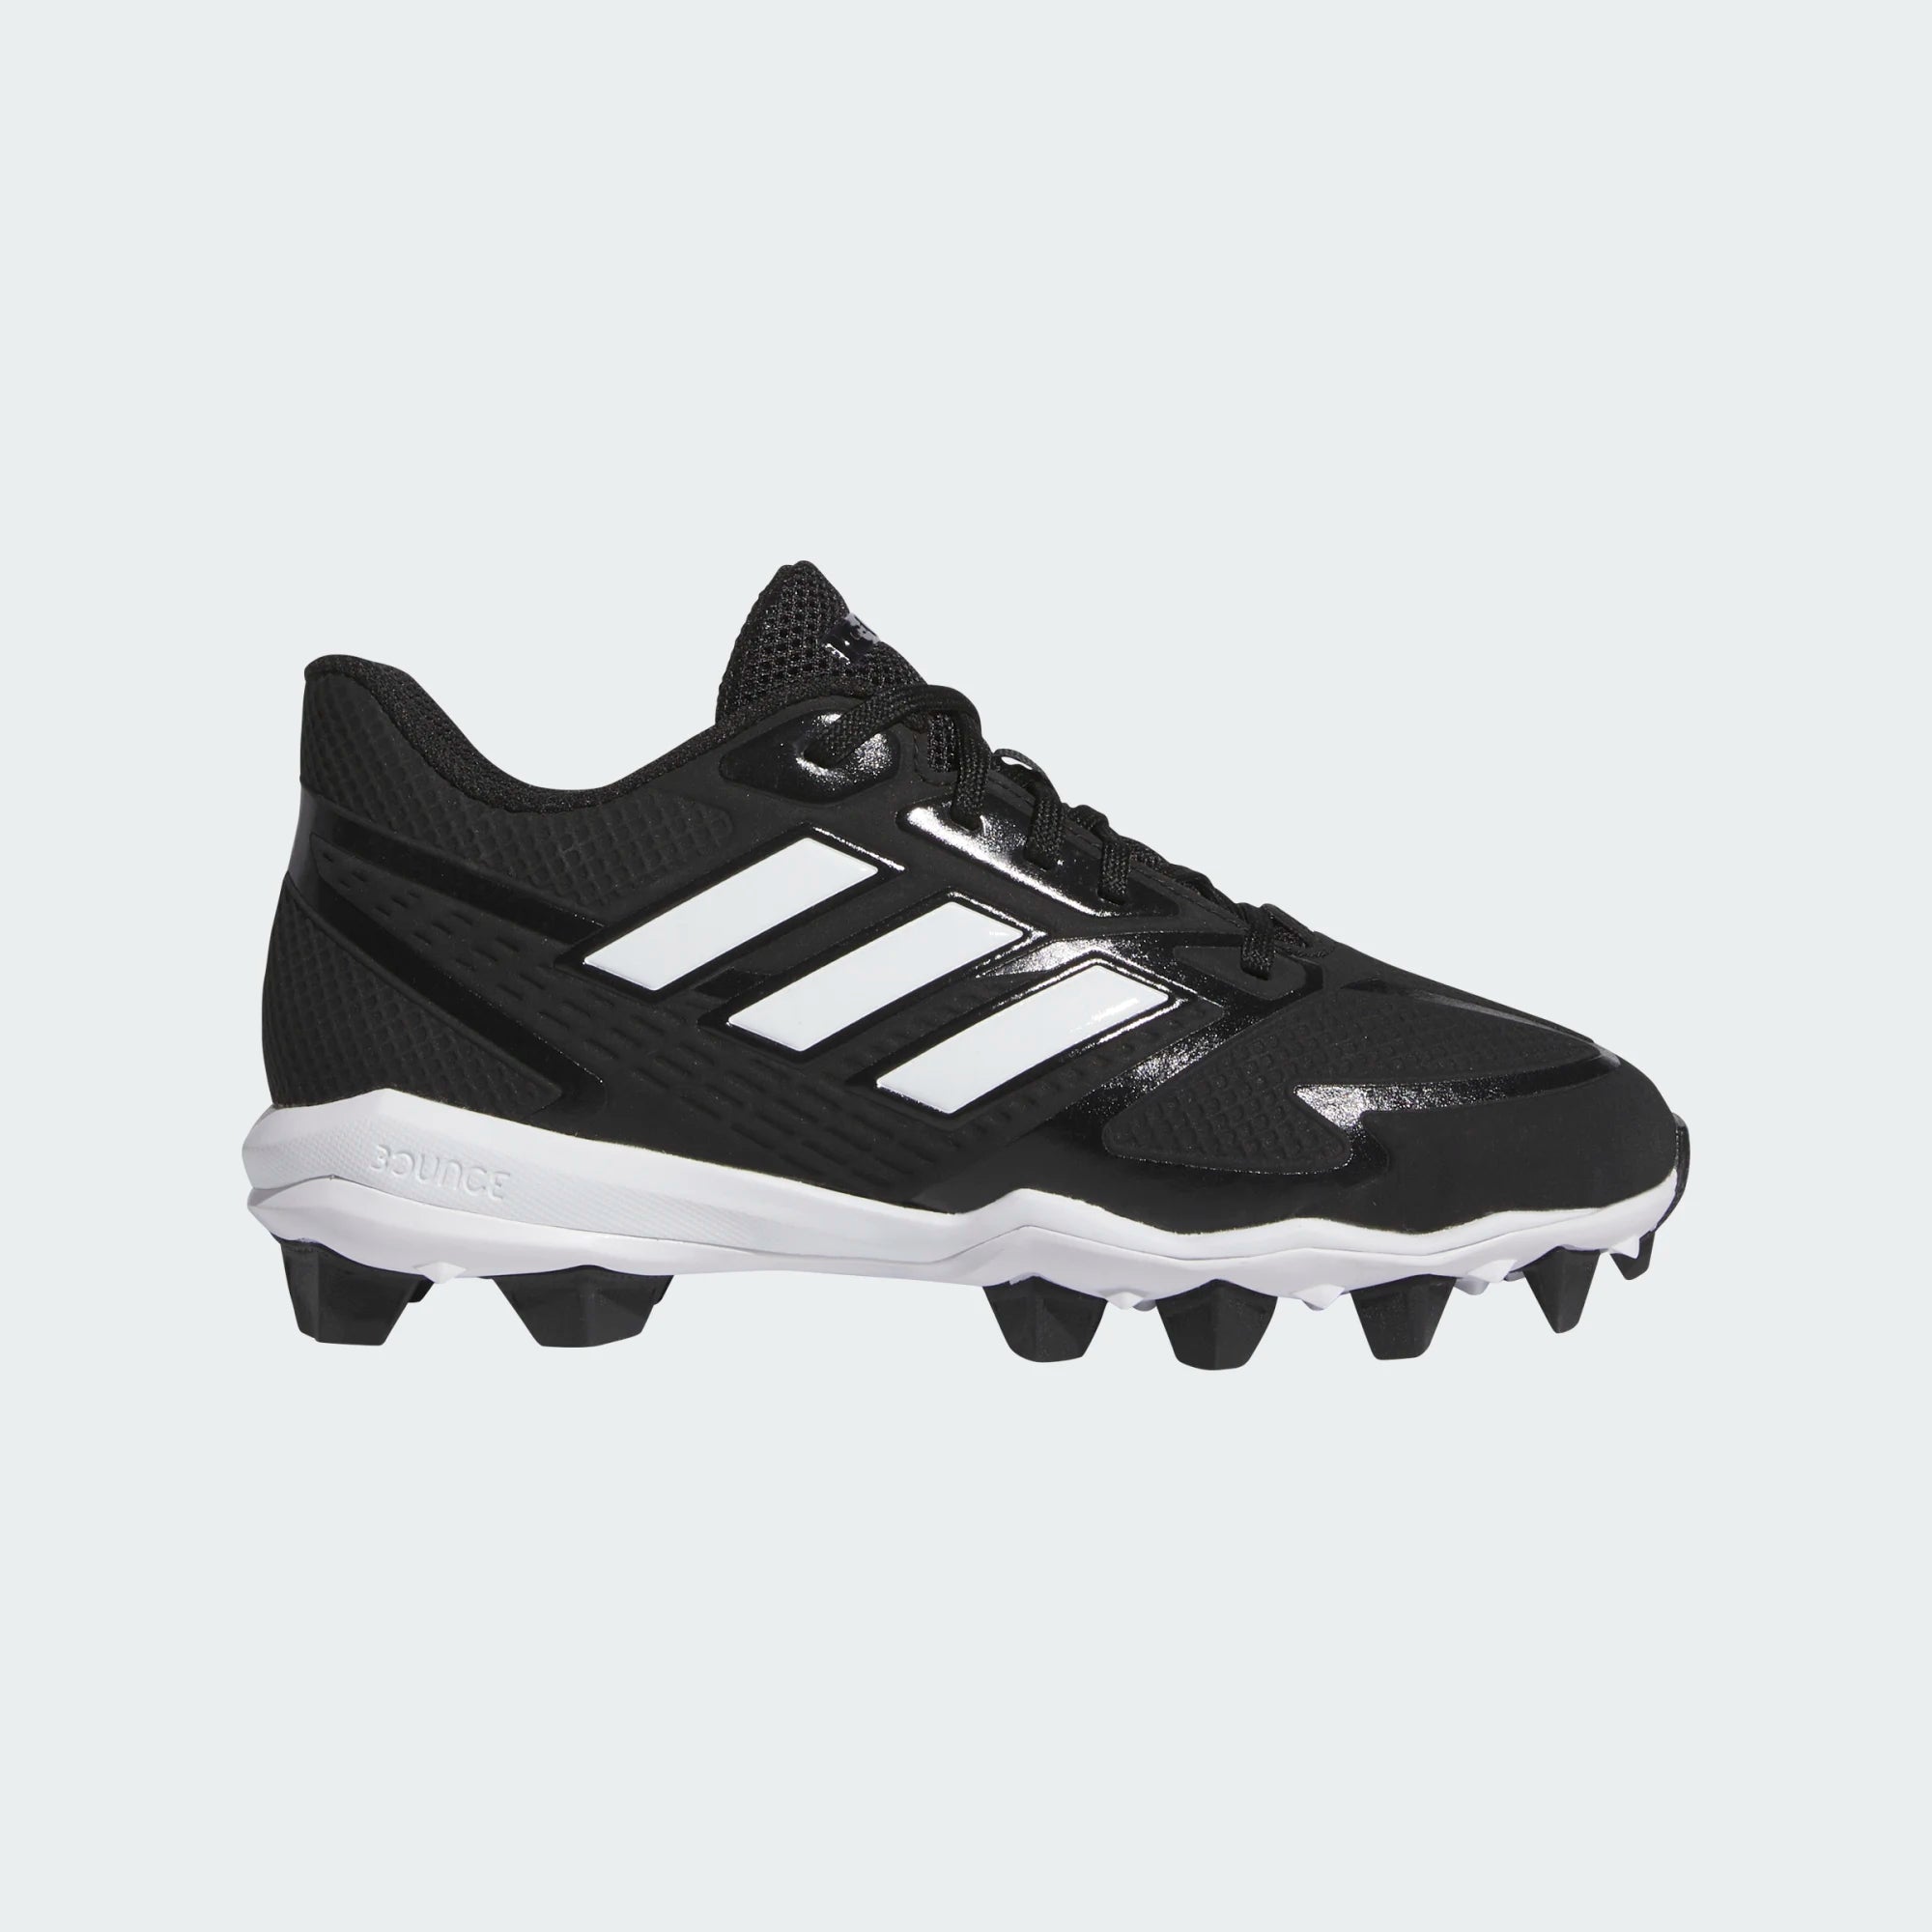 Adidas Icon 8 Md Junior Baseball Cleats-Adidas-Sports Replay - Sports Excellence